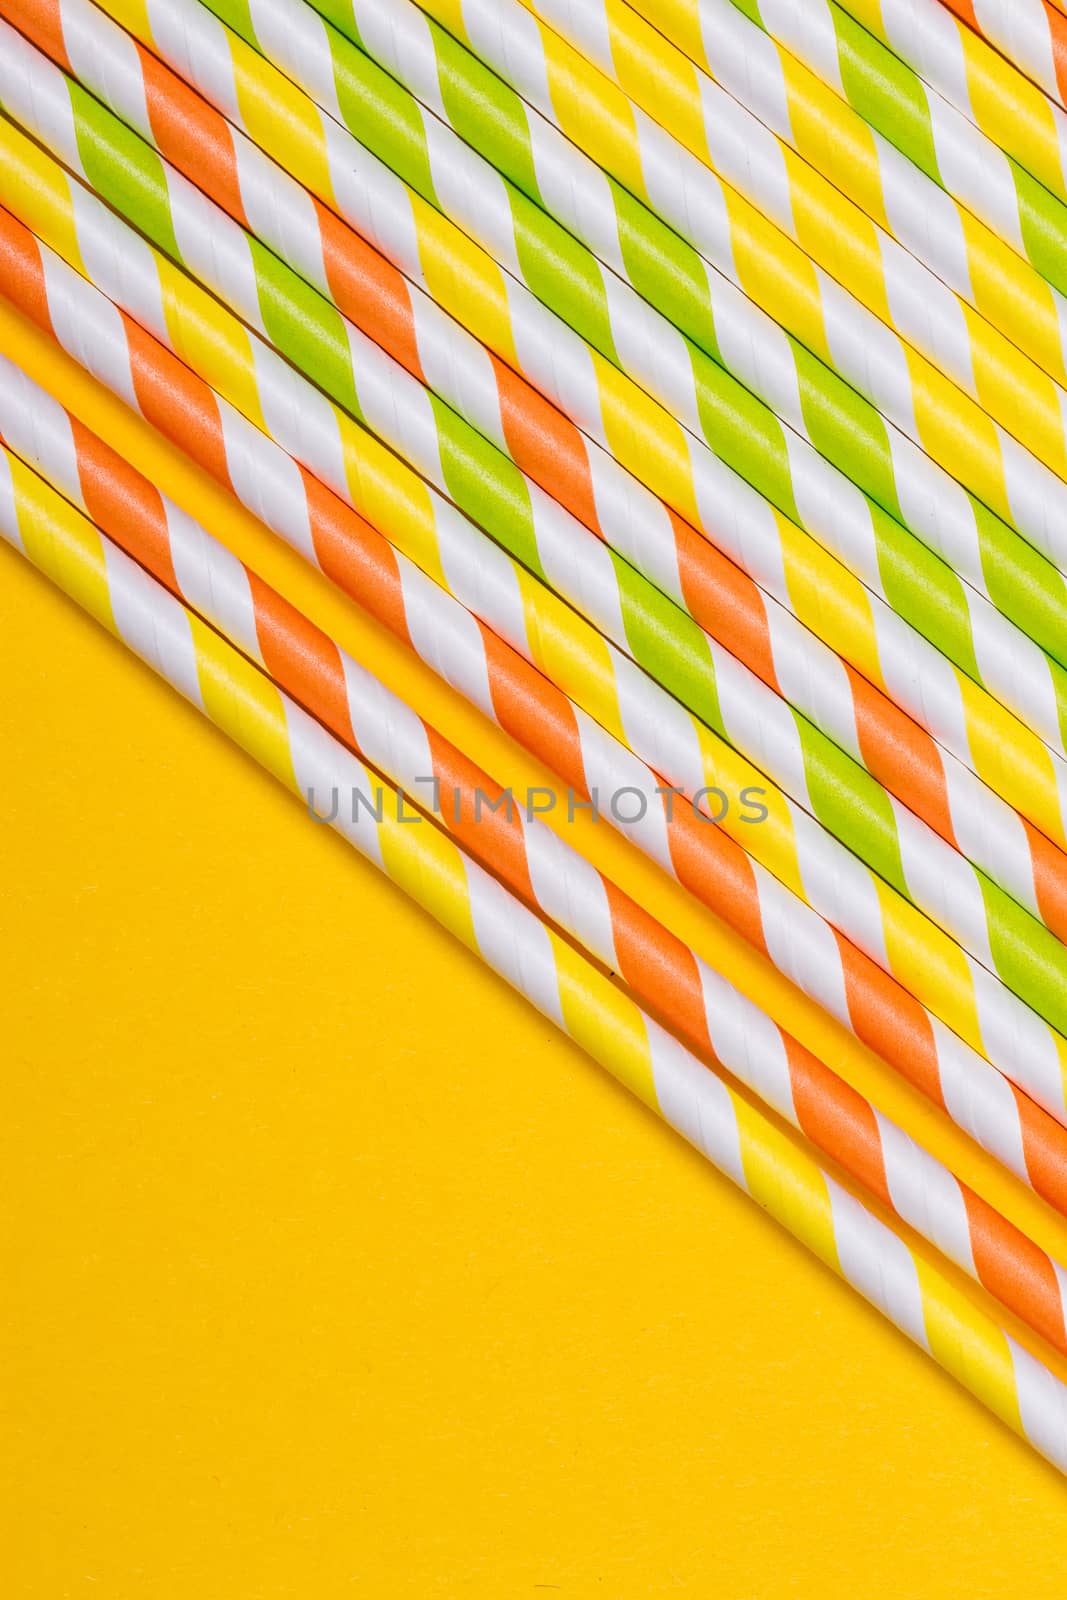 close-up colorful fancy drinking straws, fancy tube for party on the yellow background